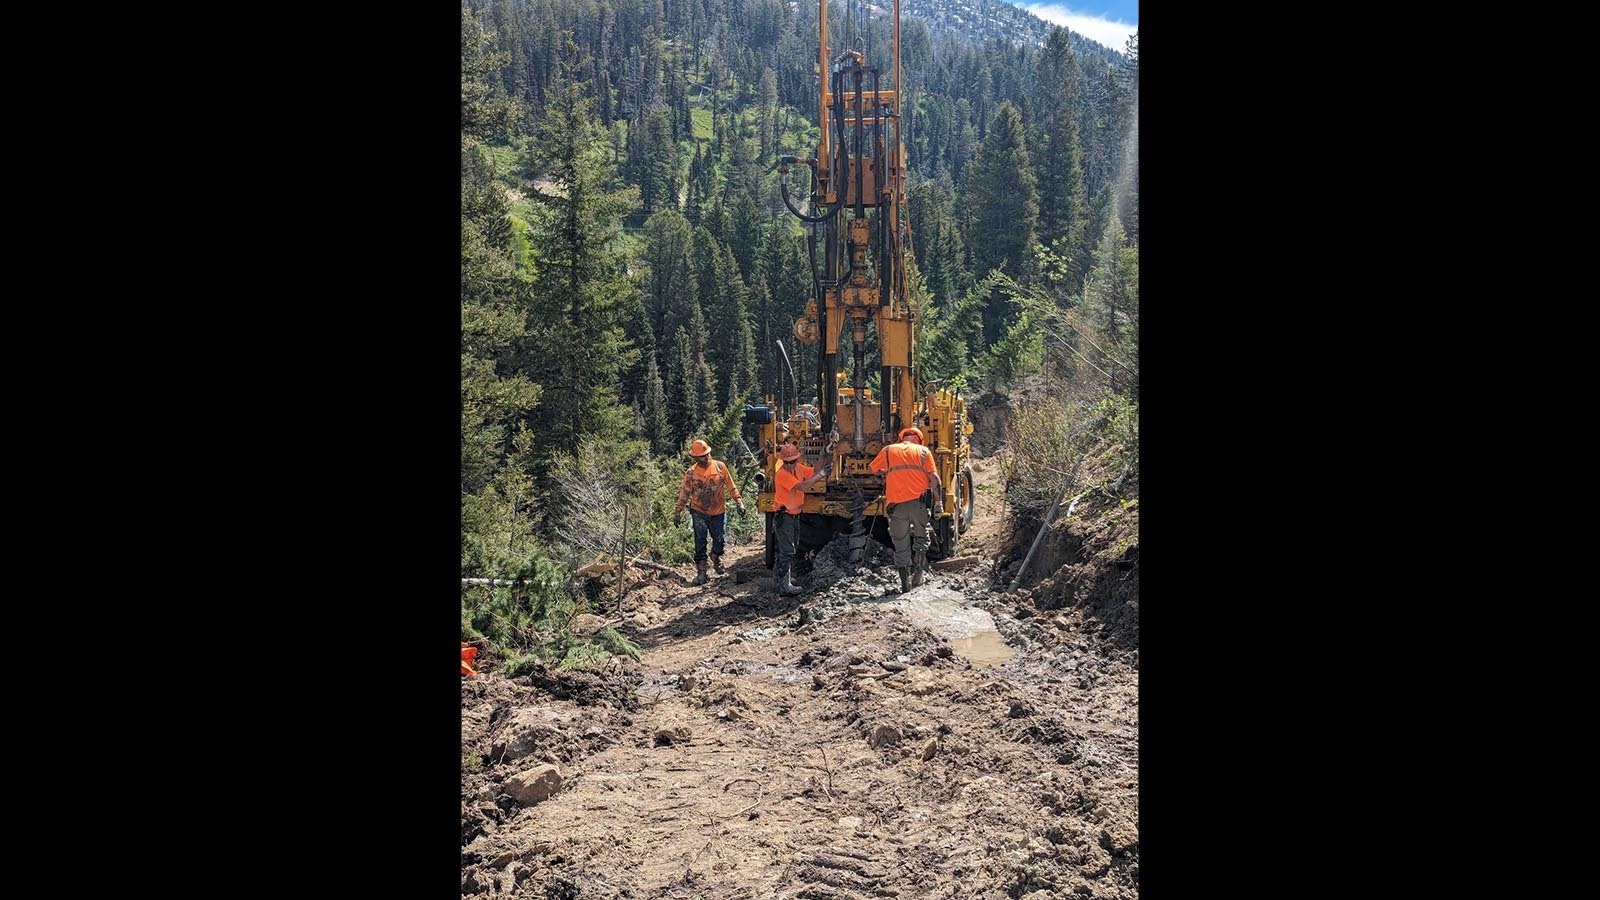 WYDOT geology crews drill into the Big Fill slide area to investigate soil profiles to confirm the cause of the Teton Pass landslide and to collect better data for potential reconstruction.